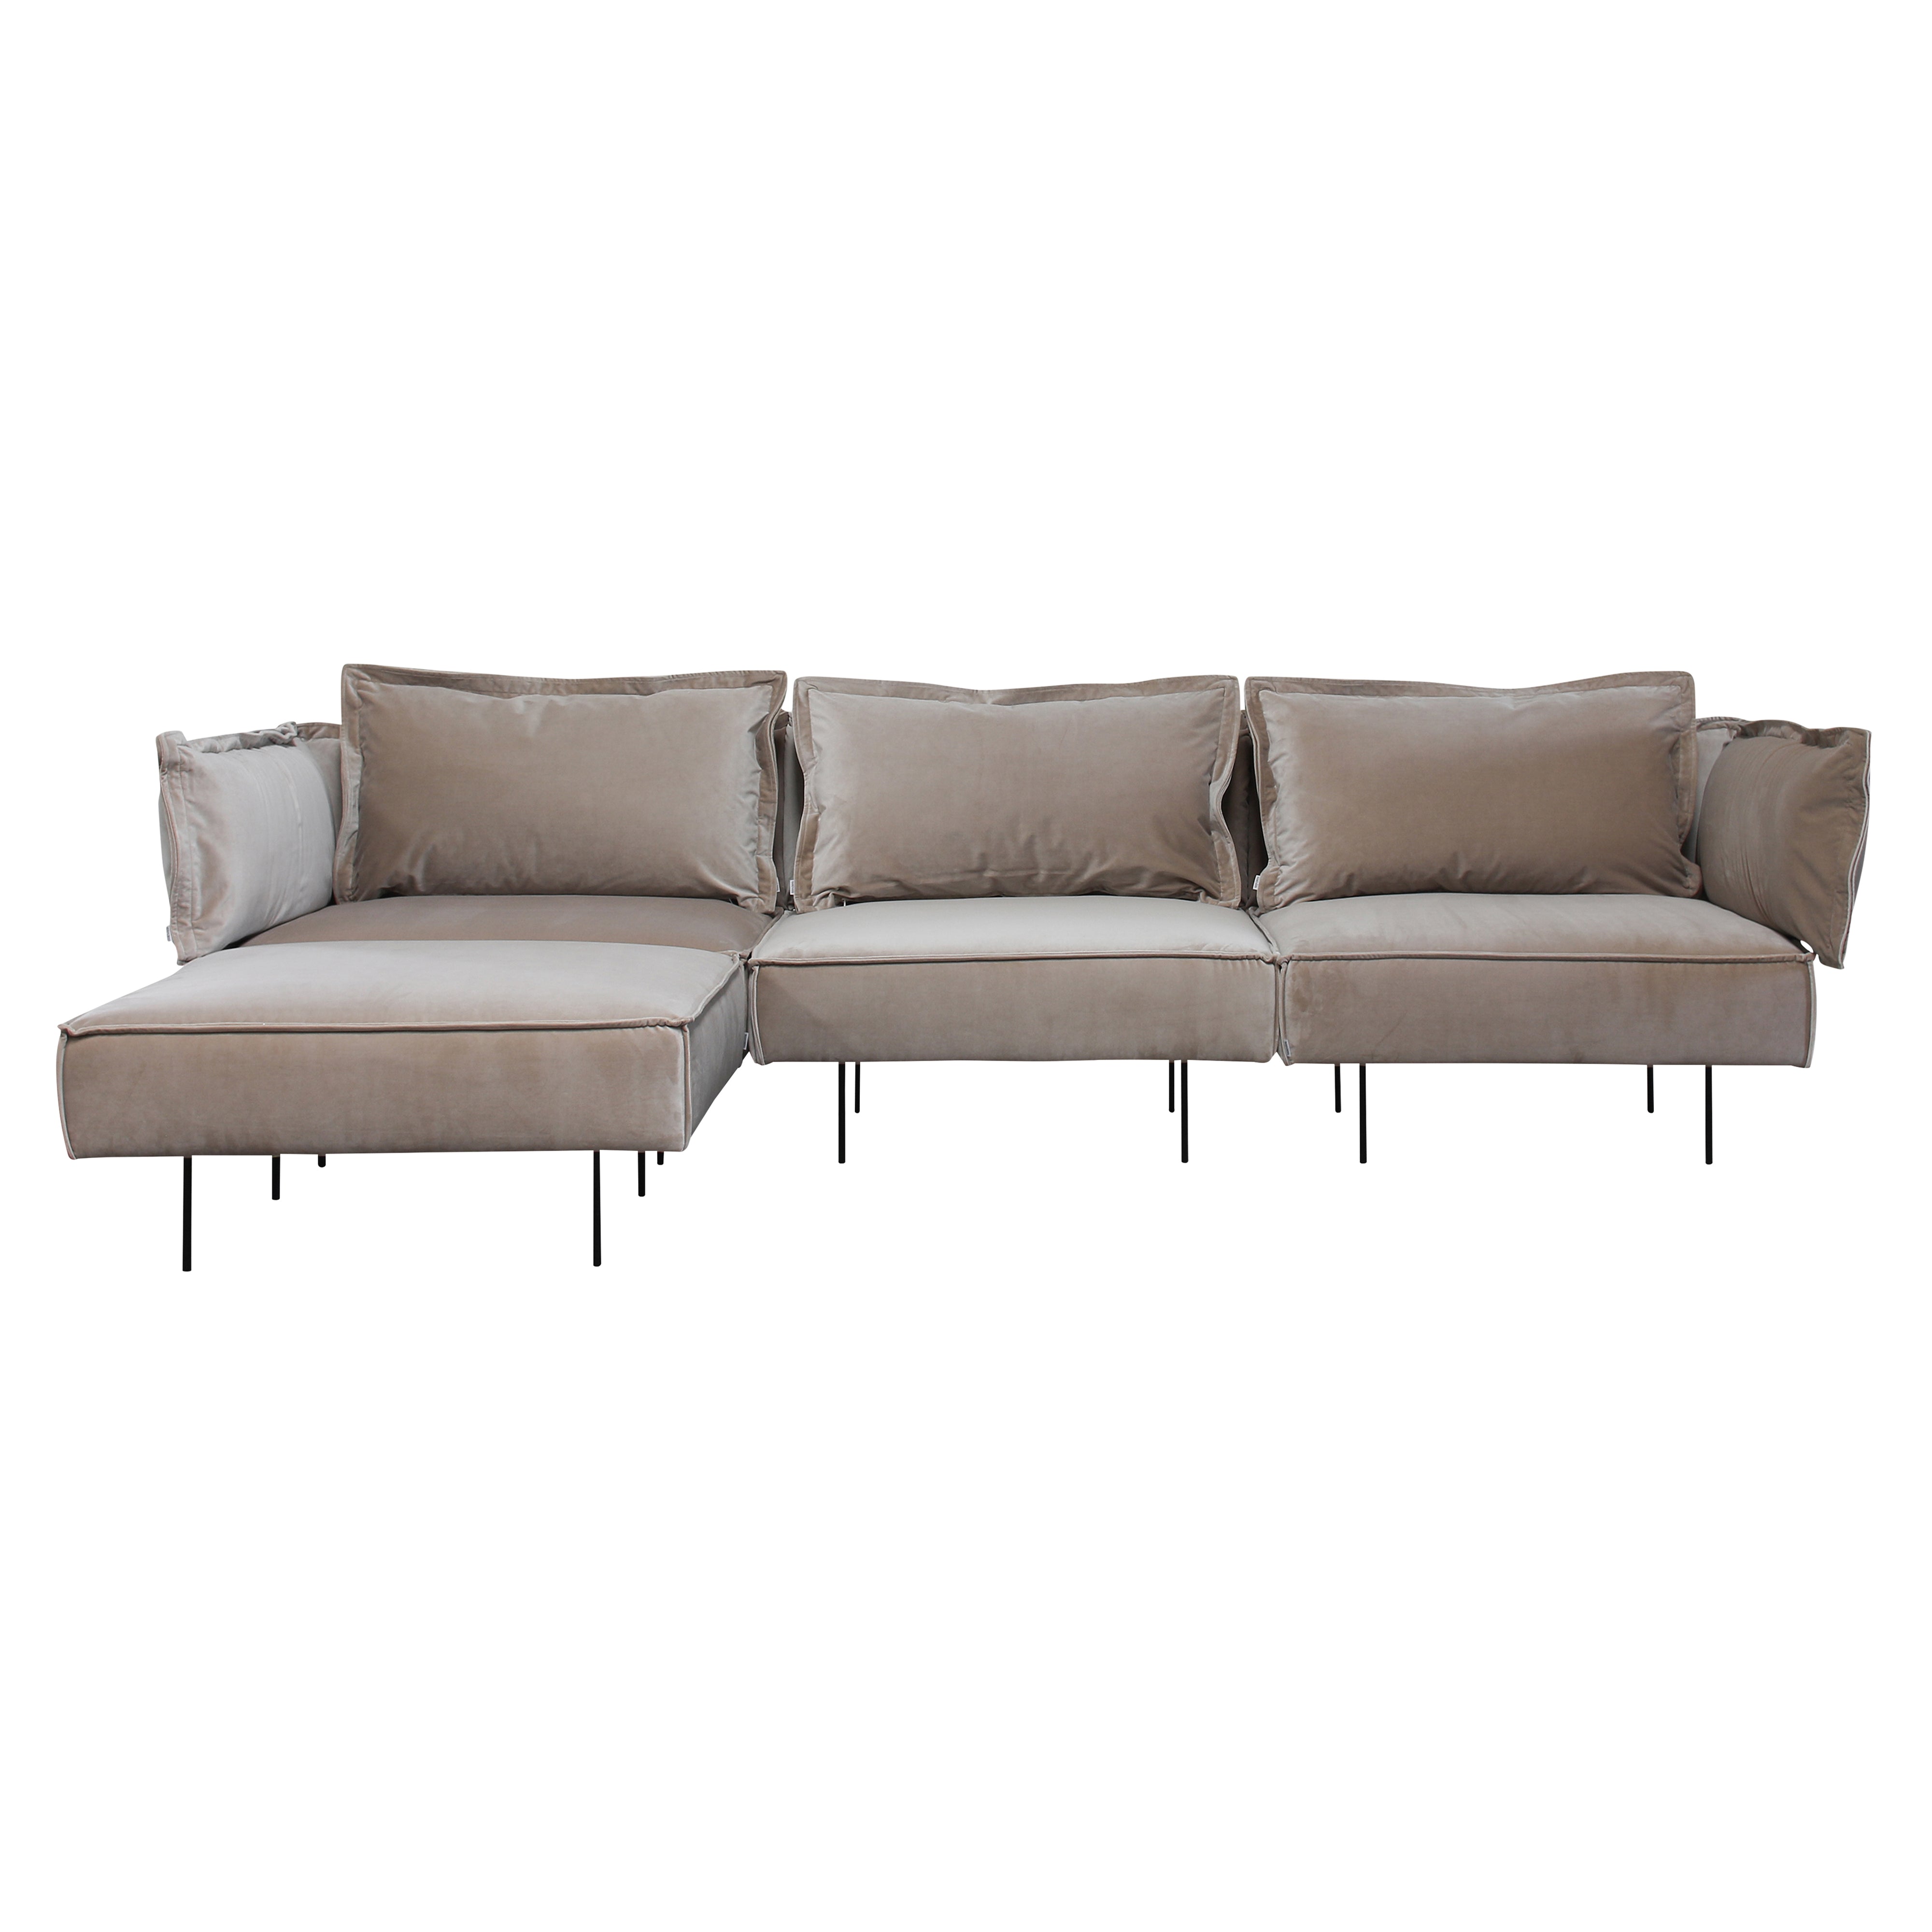 3-Seat Modular Sofa with Chaise: Sapphire 904